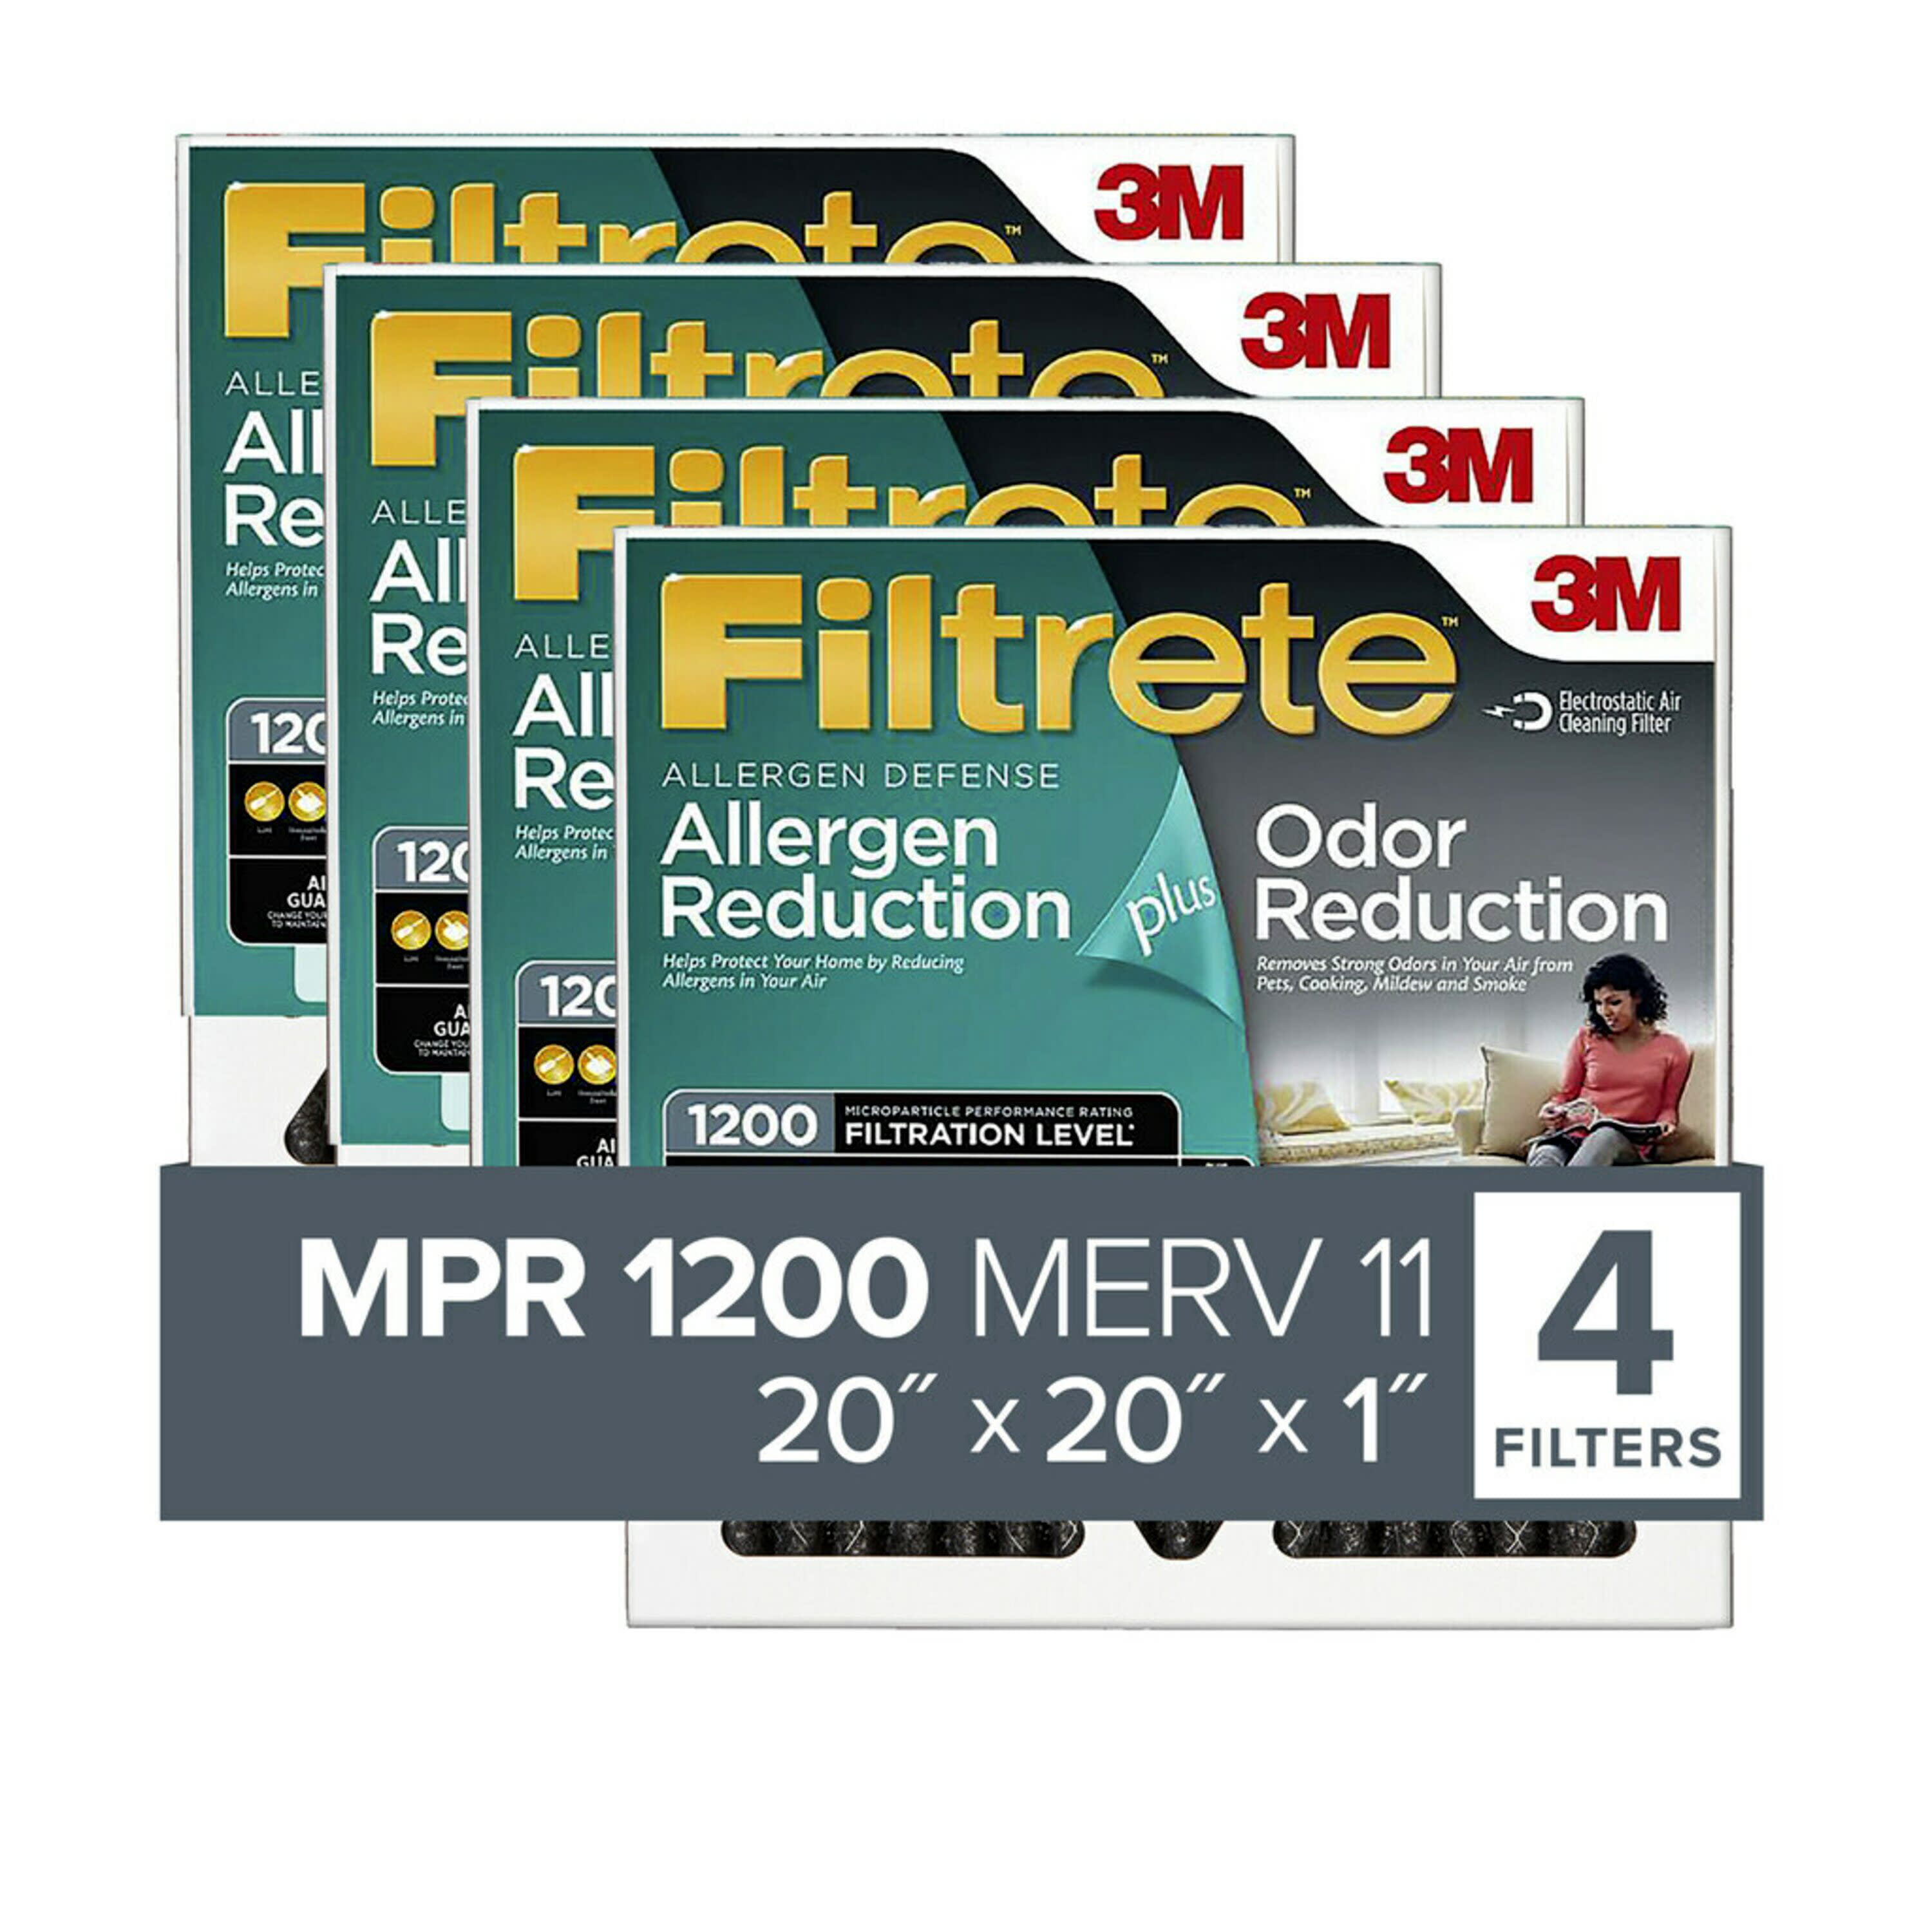 Are Filtrete Filters Worth The Money